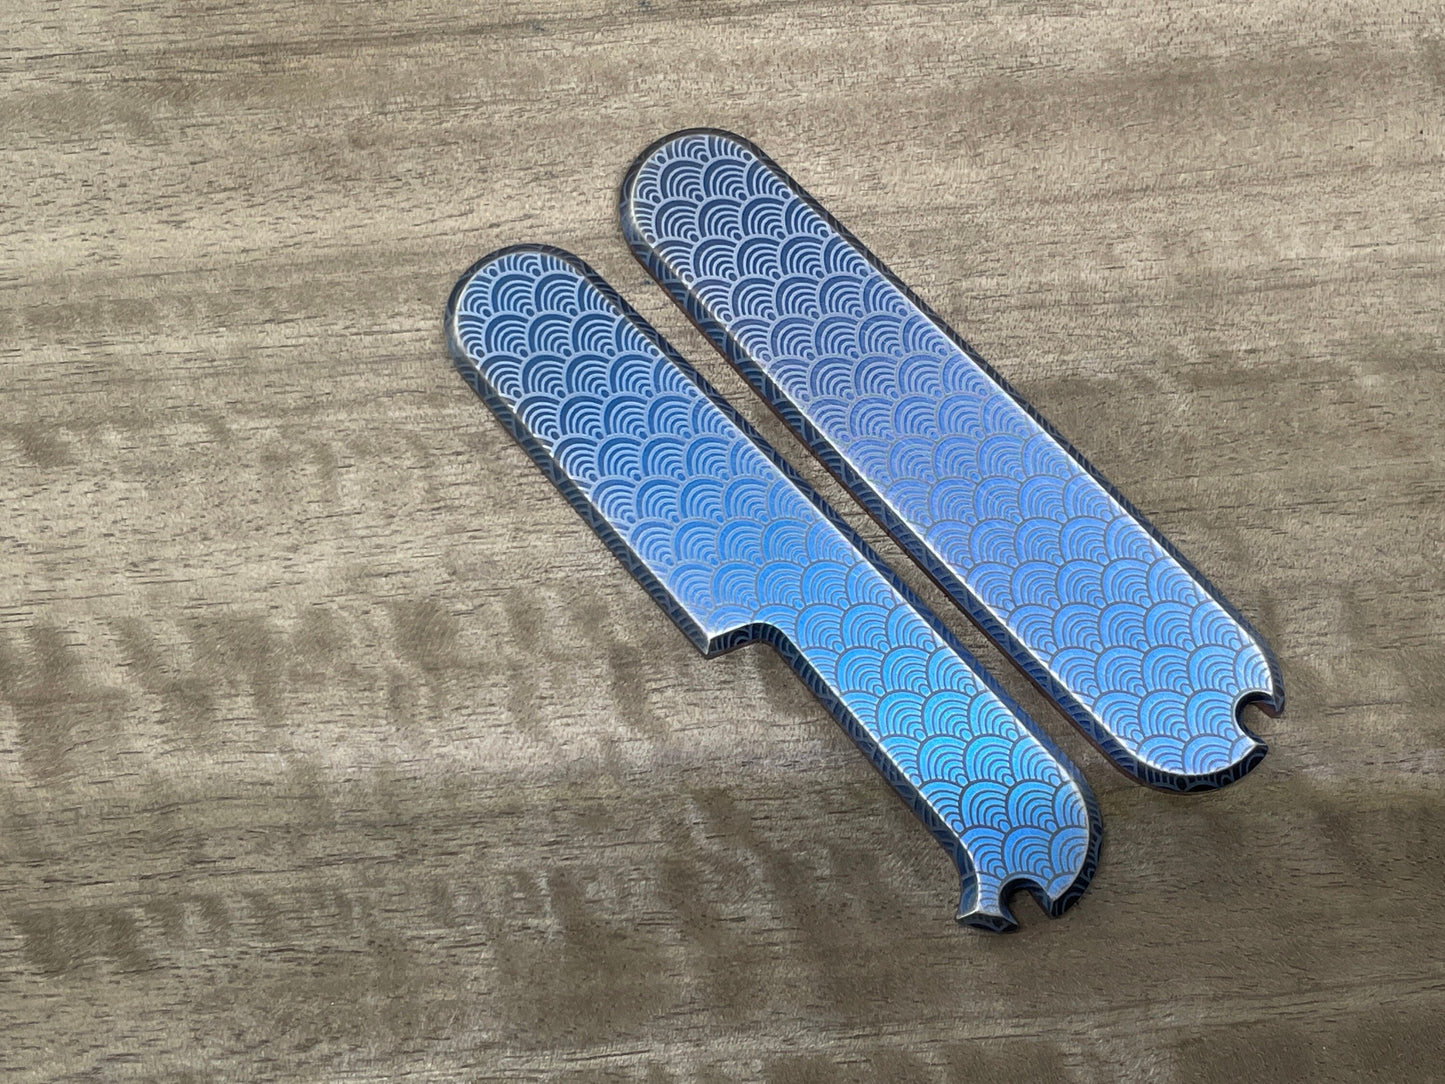 SEIGAIHA Blue ano Brushed 91mm Titanium Scales for Swiss Army SAK